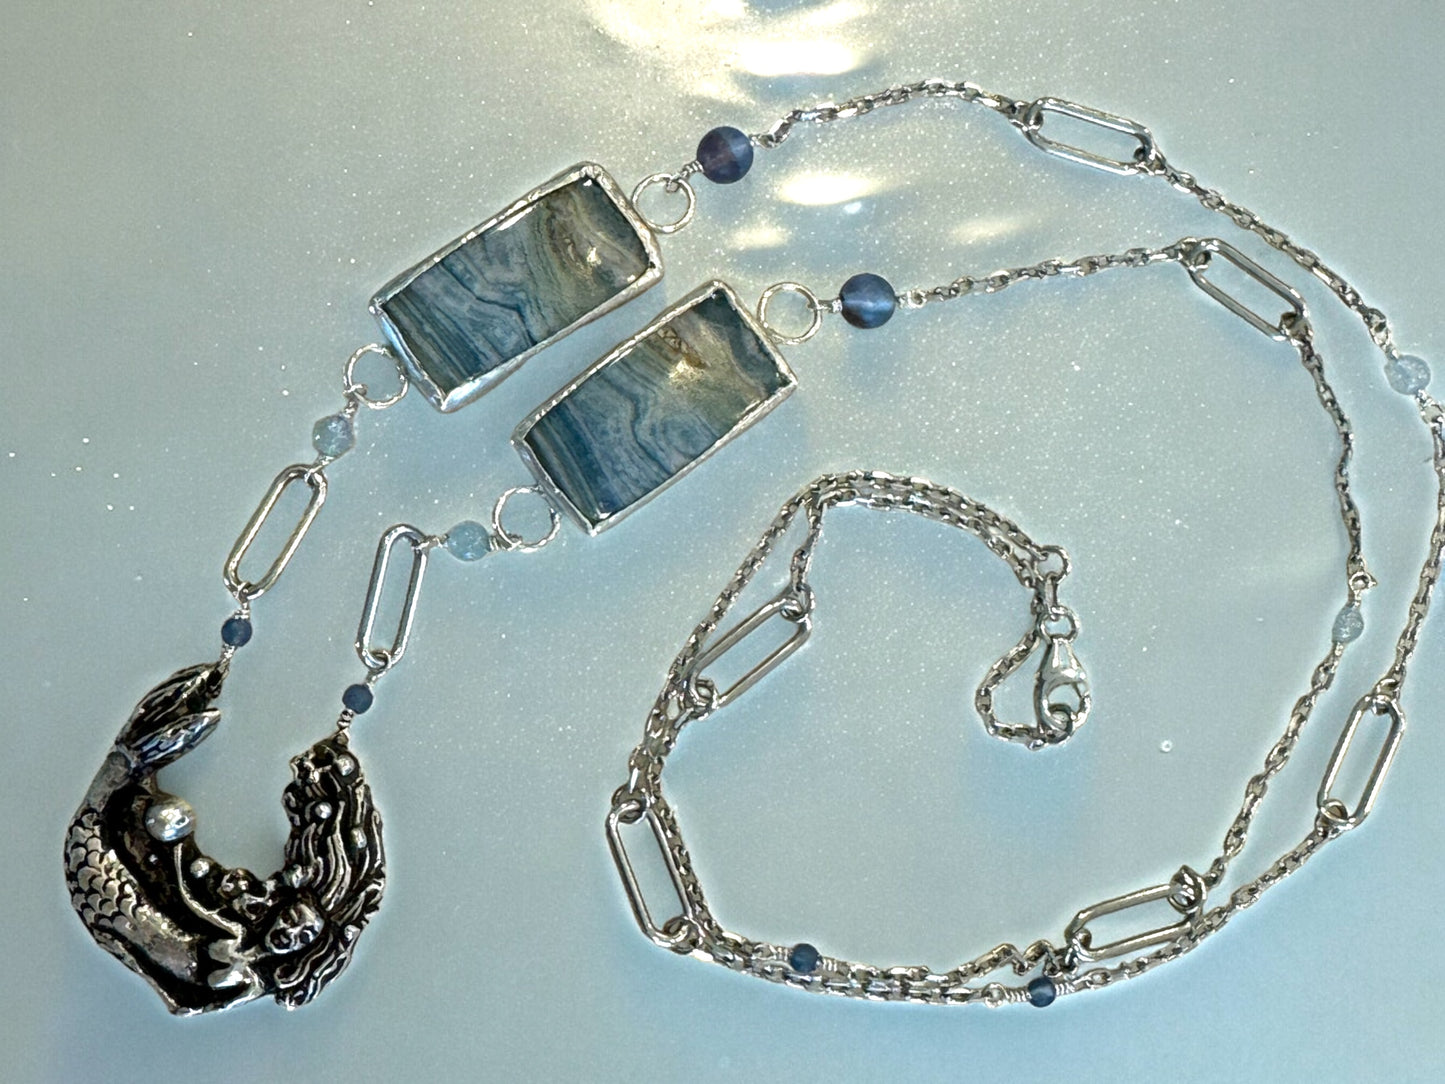 Silver Mermaid, Aquamarine, and Opalized Wood Necklace ￼